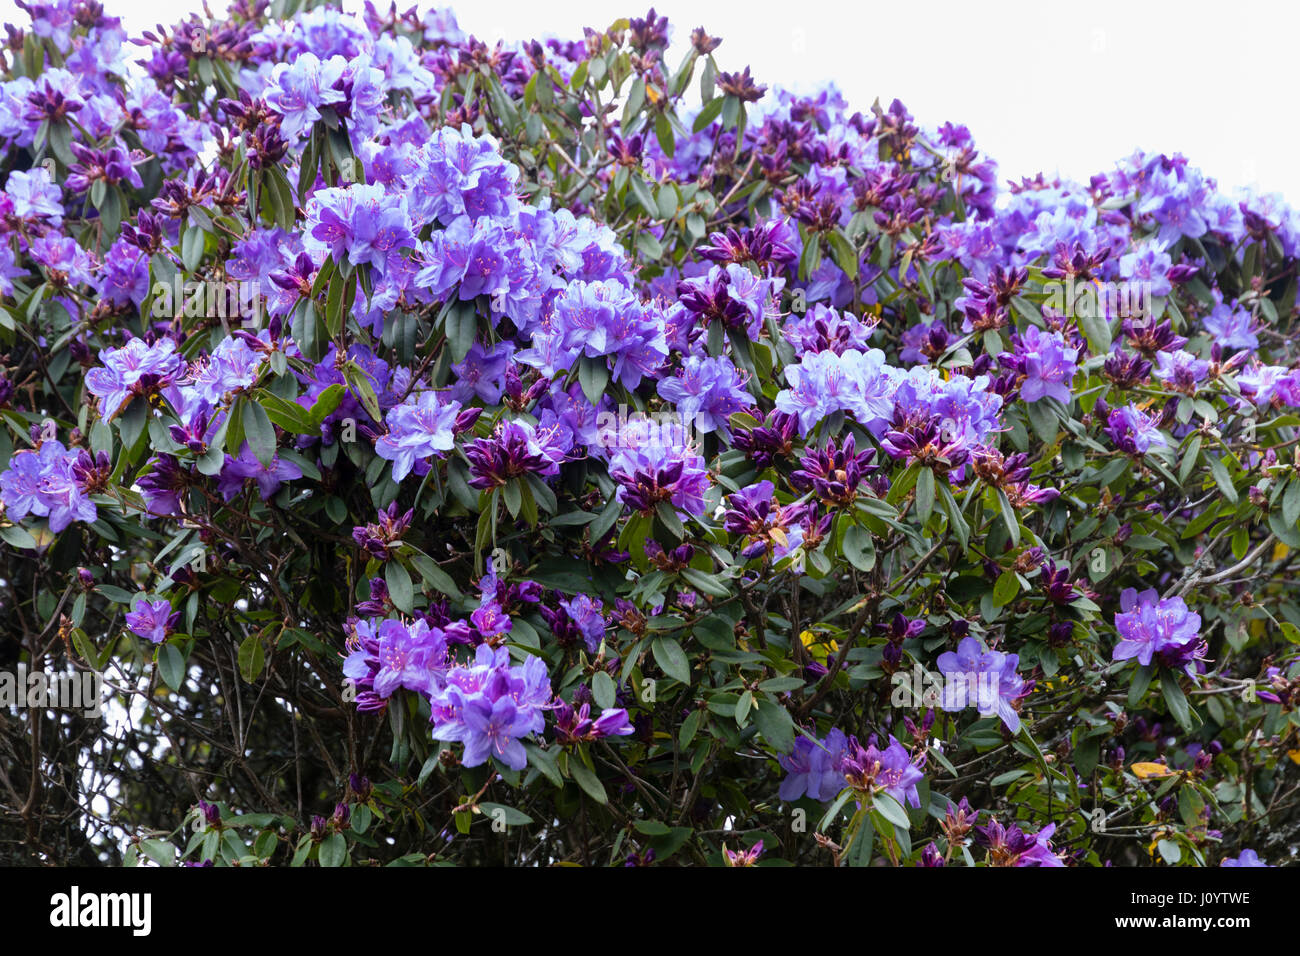 Violet-blue spring flowers of the Rhodoendron augustinii x impeditum hybrid 'St Breward' Stock Photo